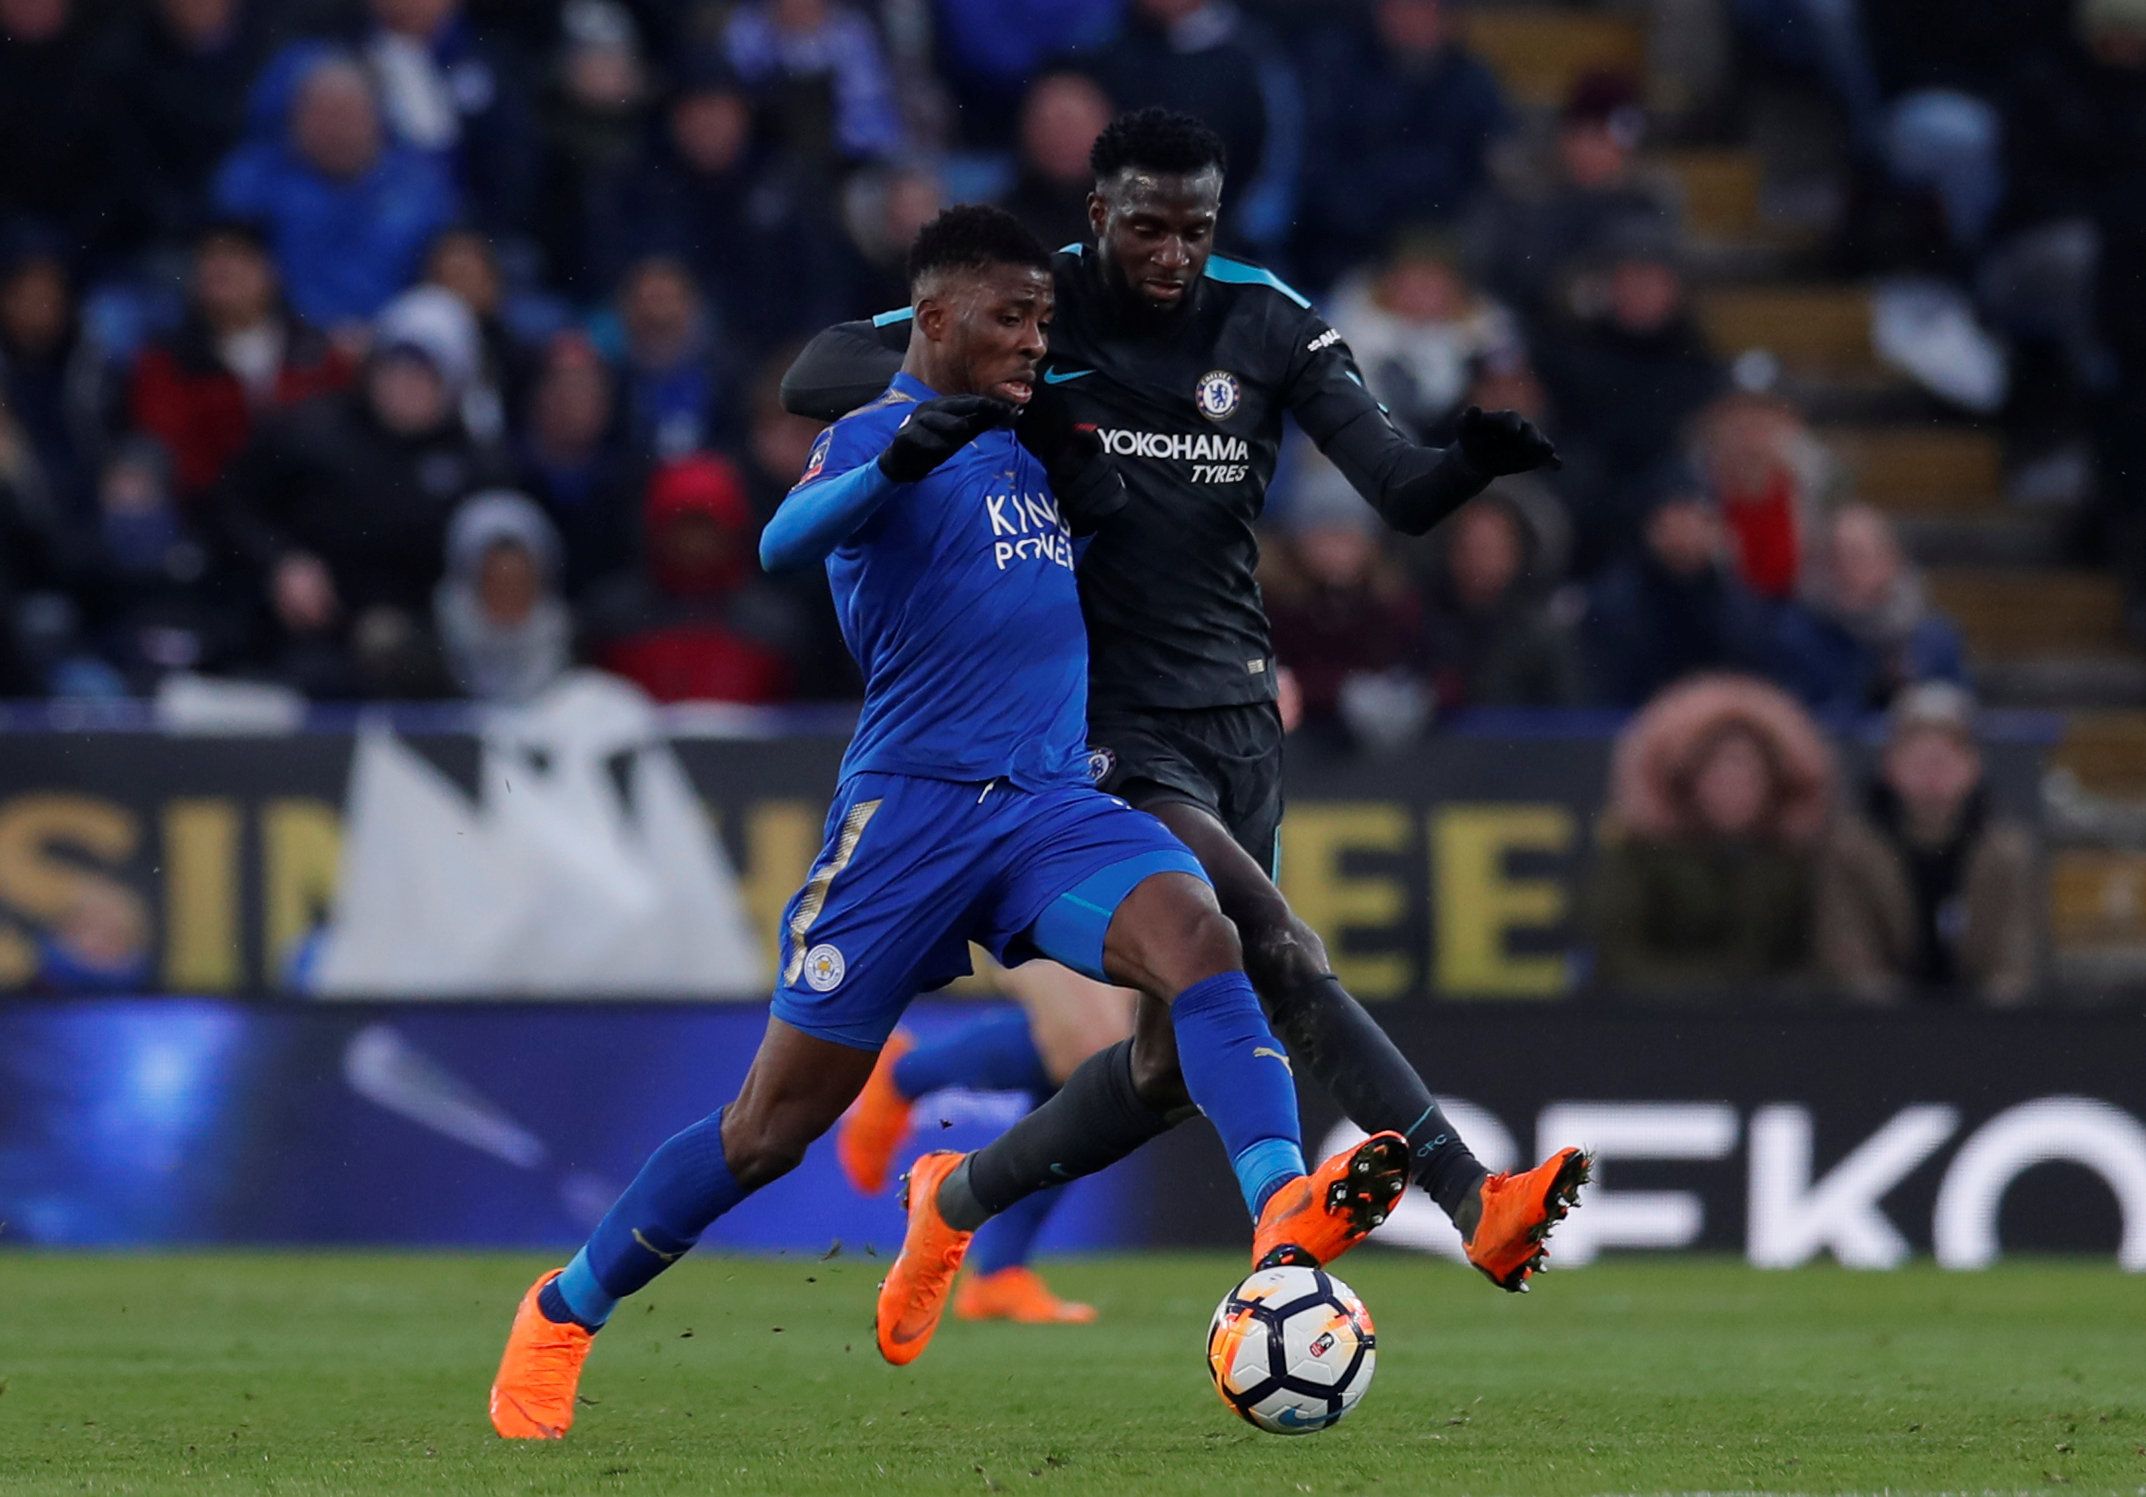 Soccer Football - FA Cup Quarter Final - Leicester City vs Chelsea - King Power Stadium, Leicester, Britain - March 18, 2018   Leicester City's Kelechi Iheanacho in action with Chelsea's Tiemoue Bakayoko     Action Images via Reuters/Andrew Couldridge